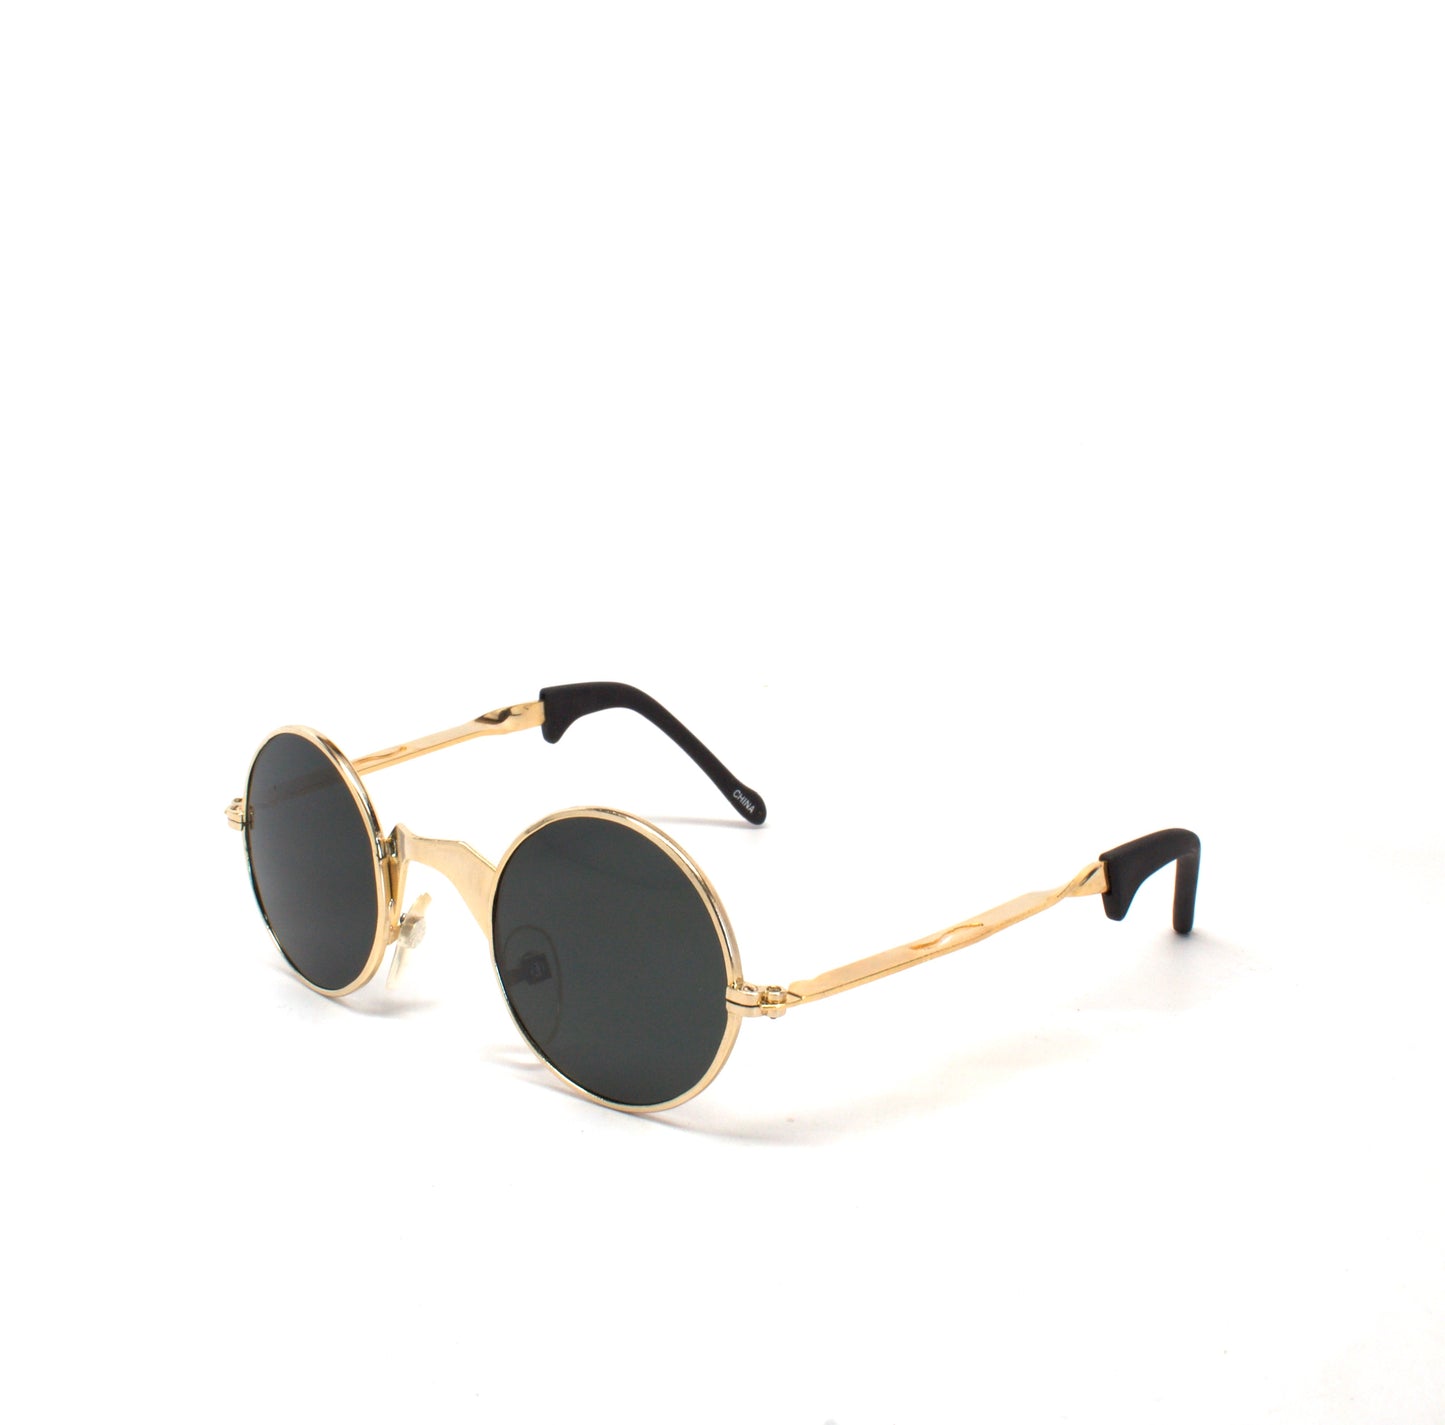 Vintage Small Size 1997 Deadstock Grunge Small Circle Frame Sunglasses - Gold